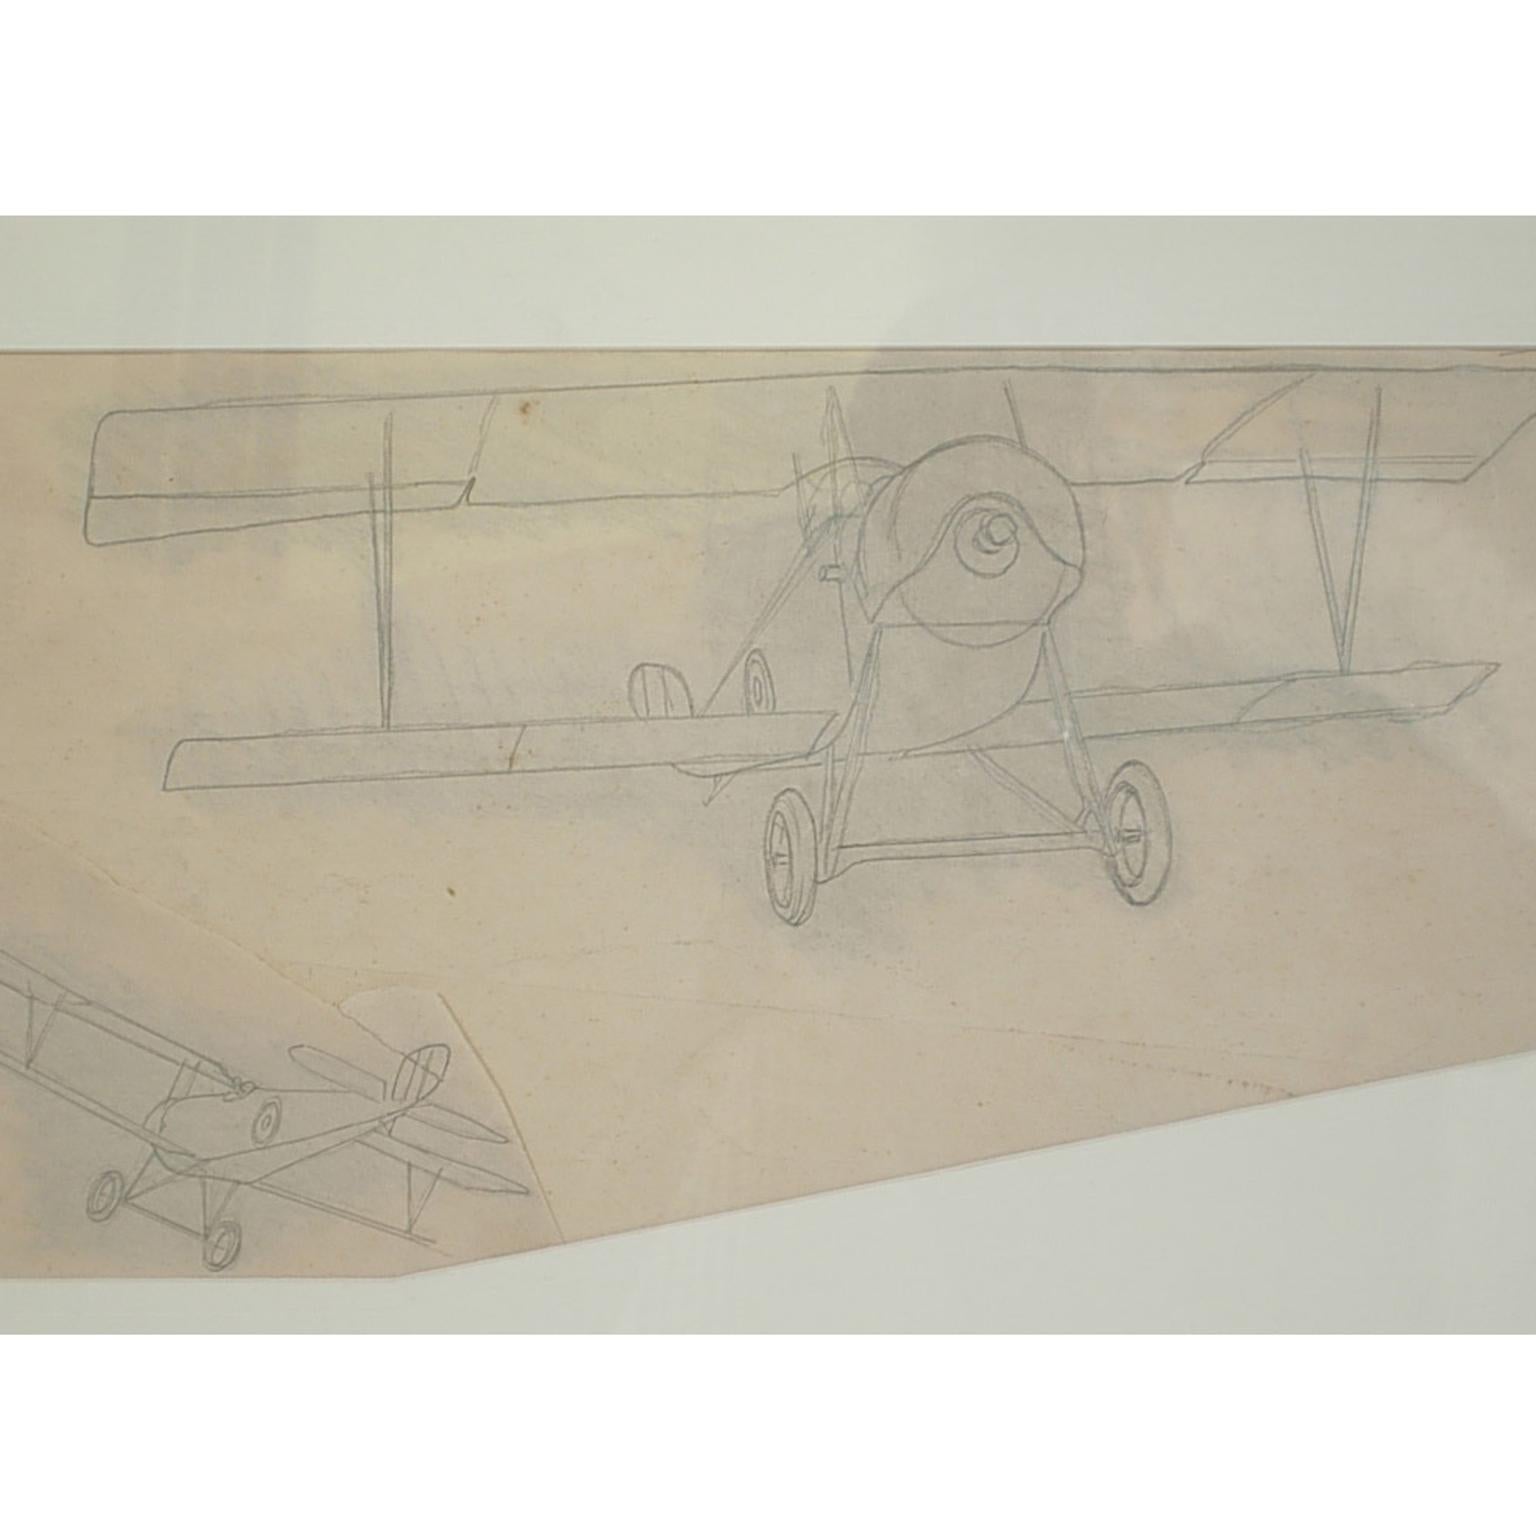 Pencil-drawing depicting two single seat biplane airplane fighter Nieuport 11 Bebe of 1915, by Riccardo Cavigioli. Measure with frame cm 59 x 38 - inches 23.2 x 15.
Riccardo Cavigioli was born in Milan on 10th November 1895 and he died in Gavirate